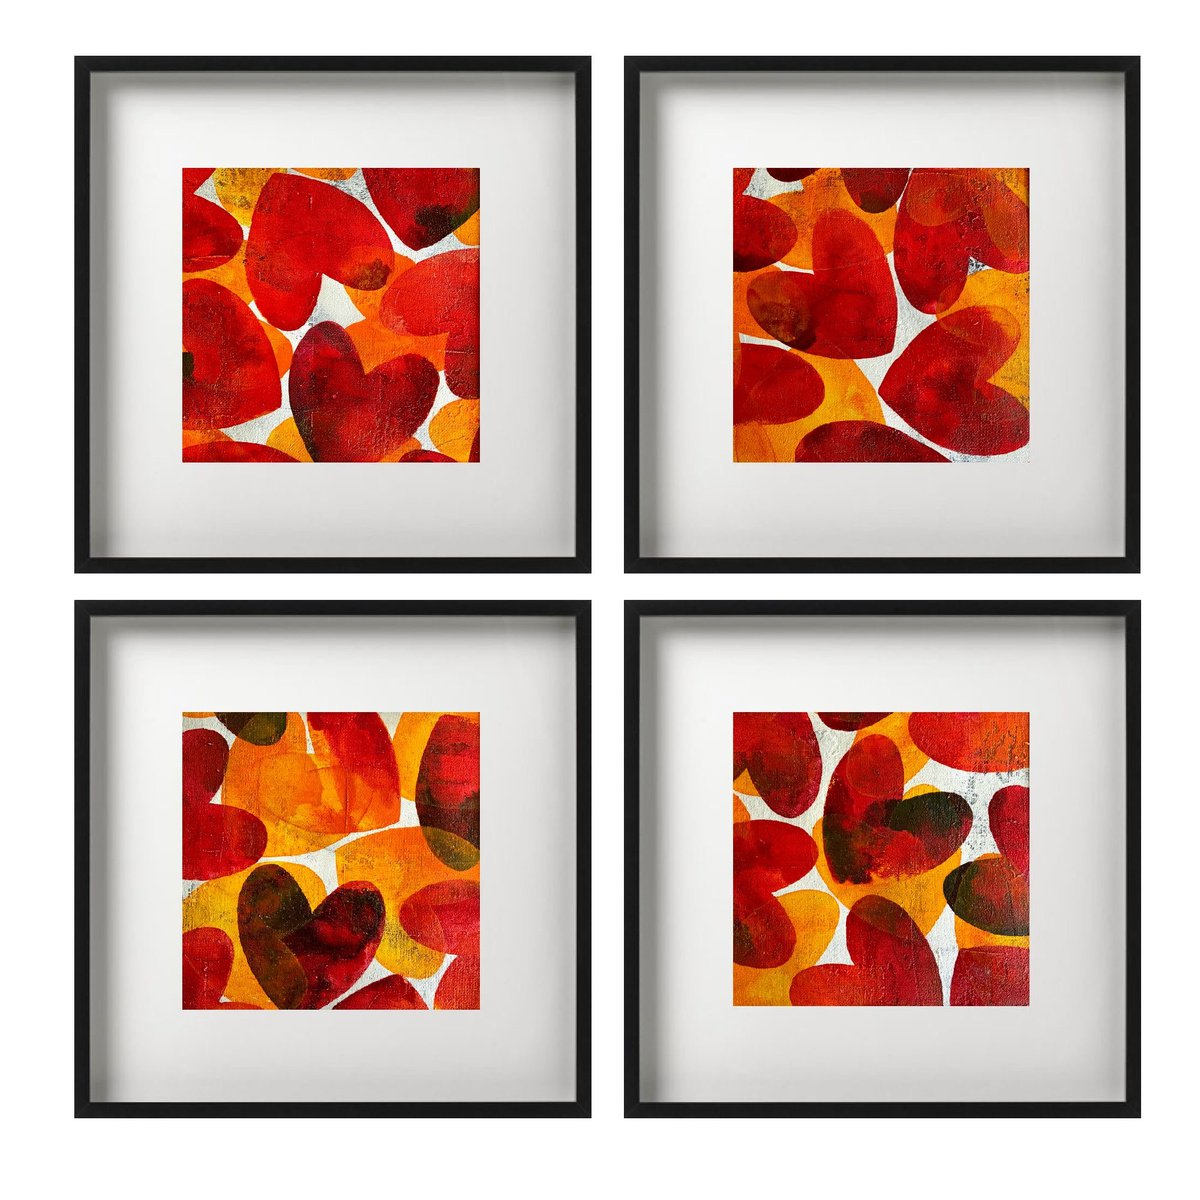 Love ❤️ in red No. 1129 - set of 4 by Anita Kaufmann